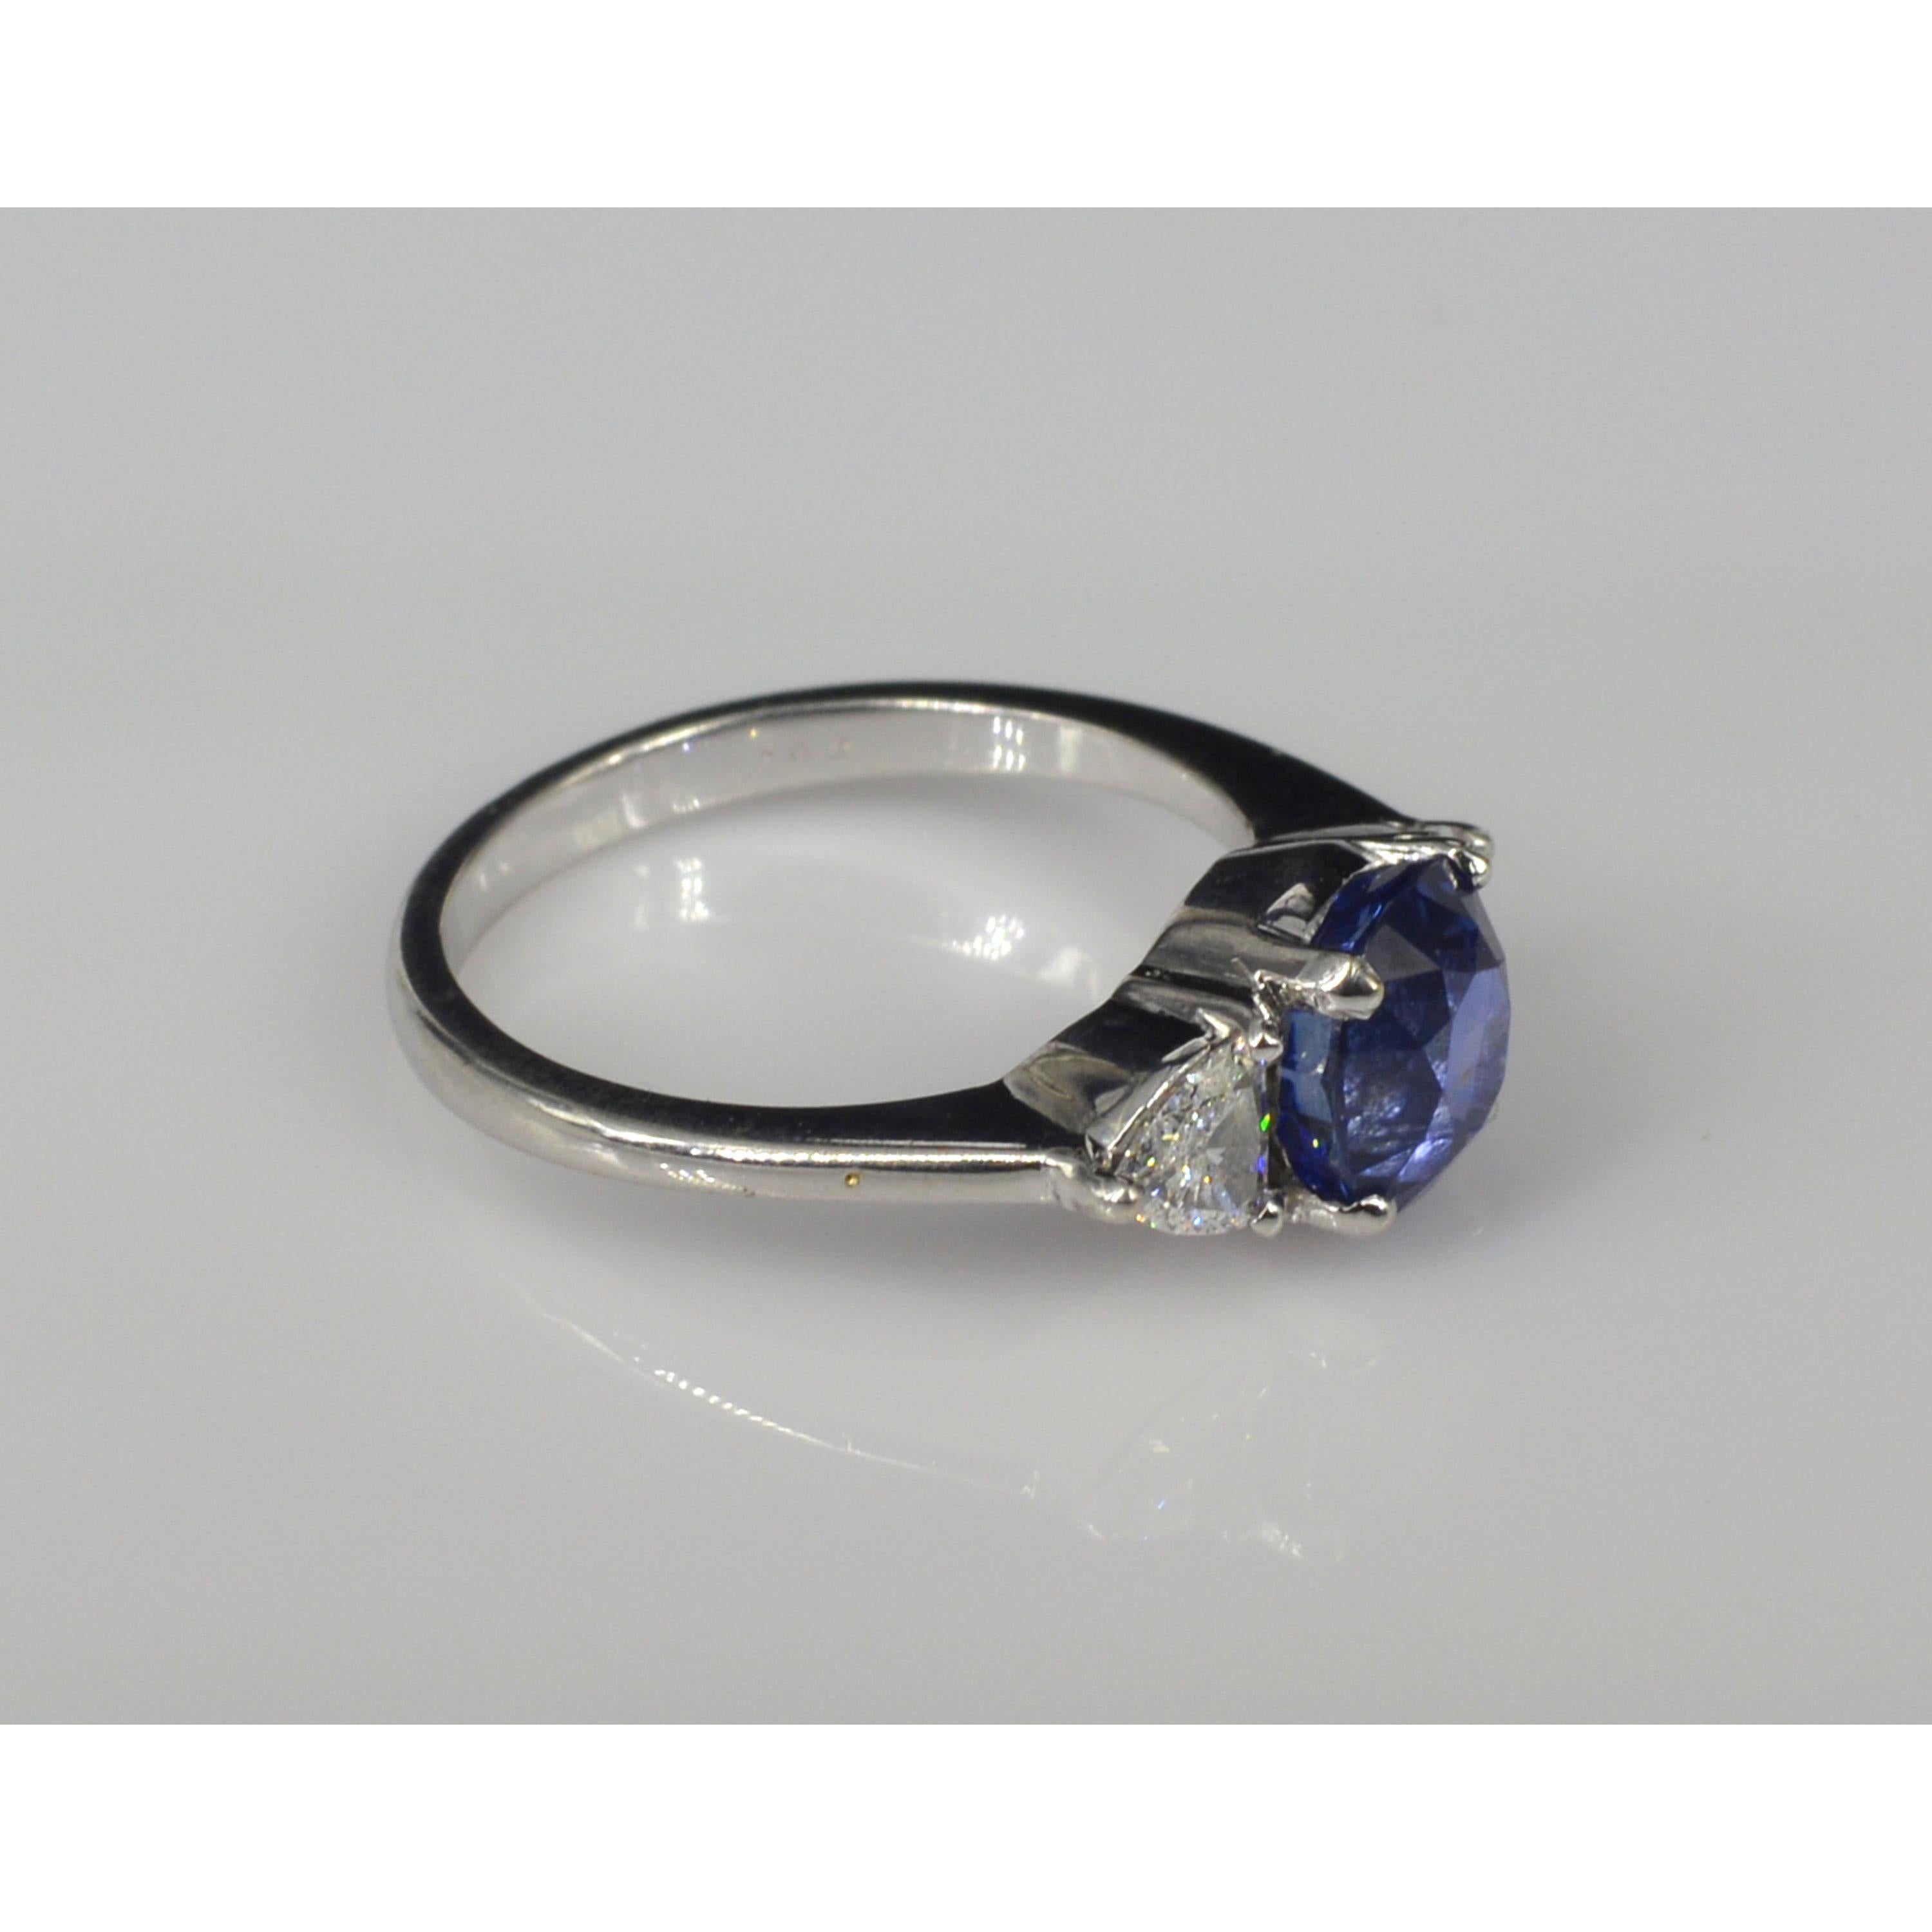 For Sale:  Natural Sapphire Engagement Ring, Vintage Sapphire Wedding Ring 3